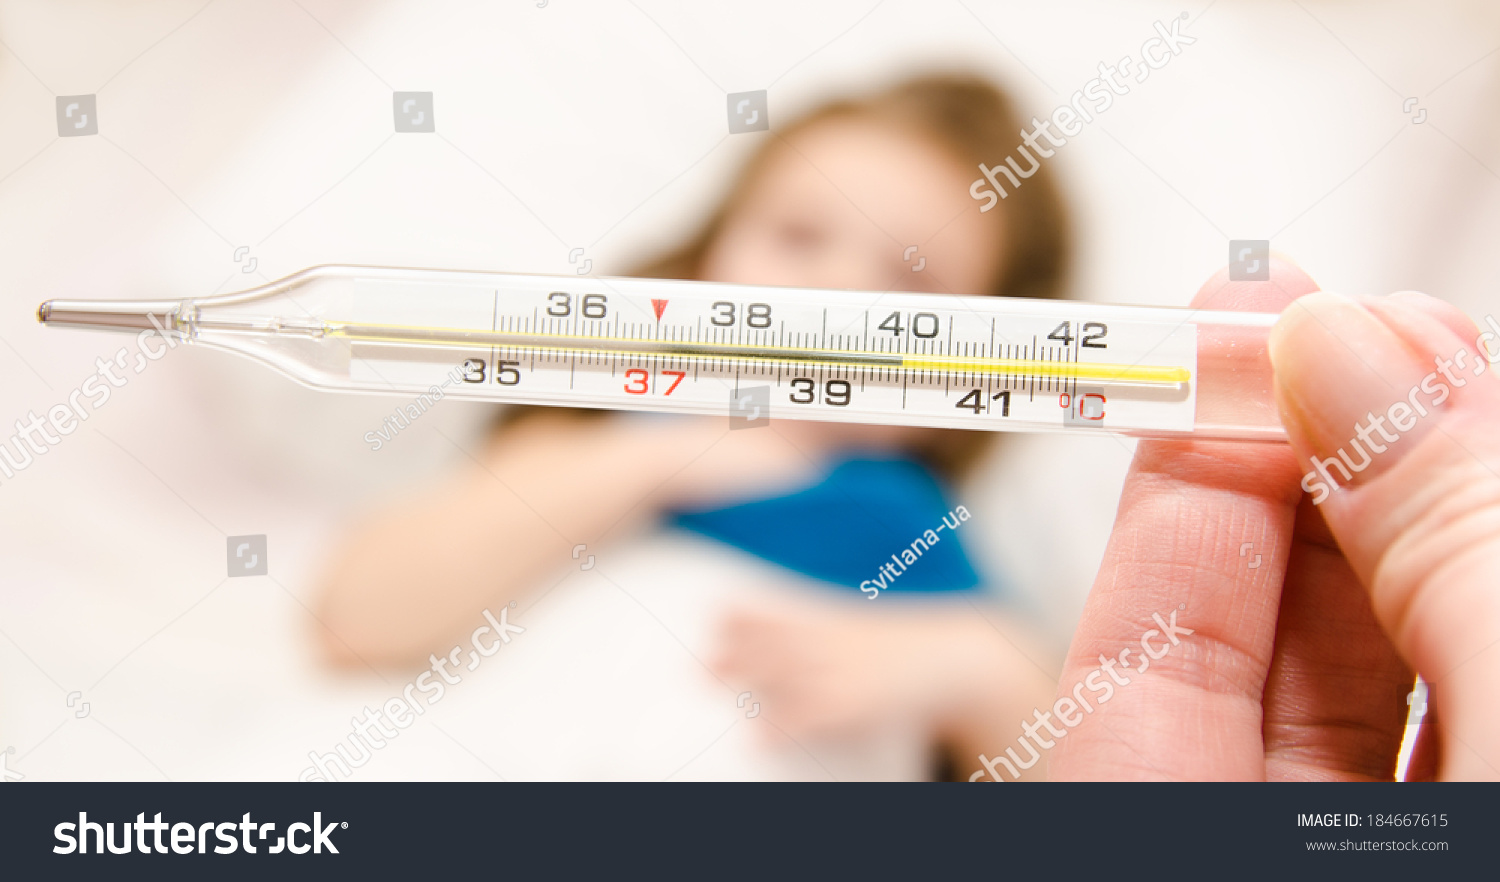 http://image.shutterstock.com/z/stock-photo--mother-holding-thermometer-foreground-and-sick-little-girl-in-bed-184667615.jpg